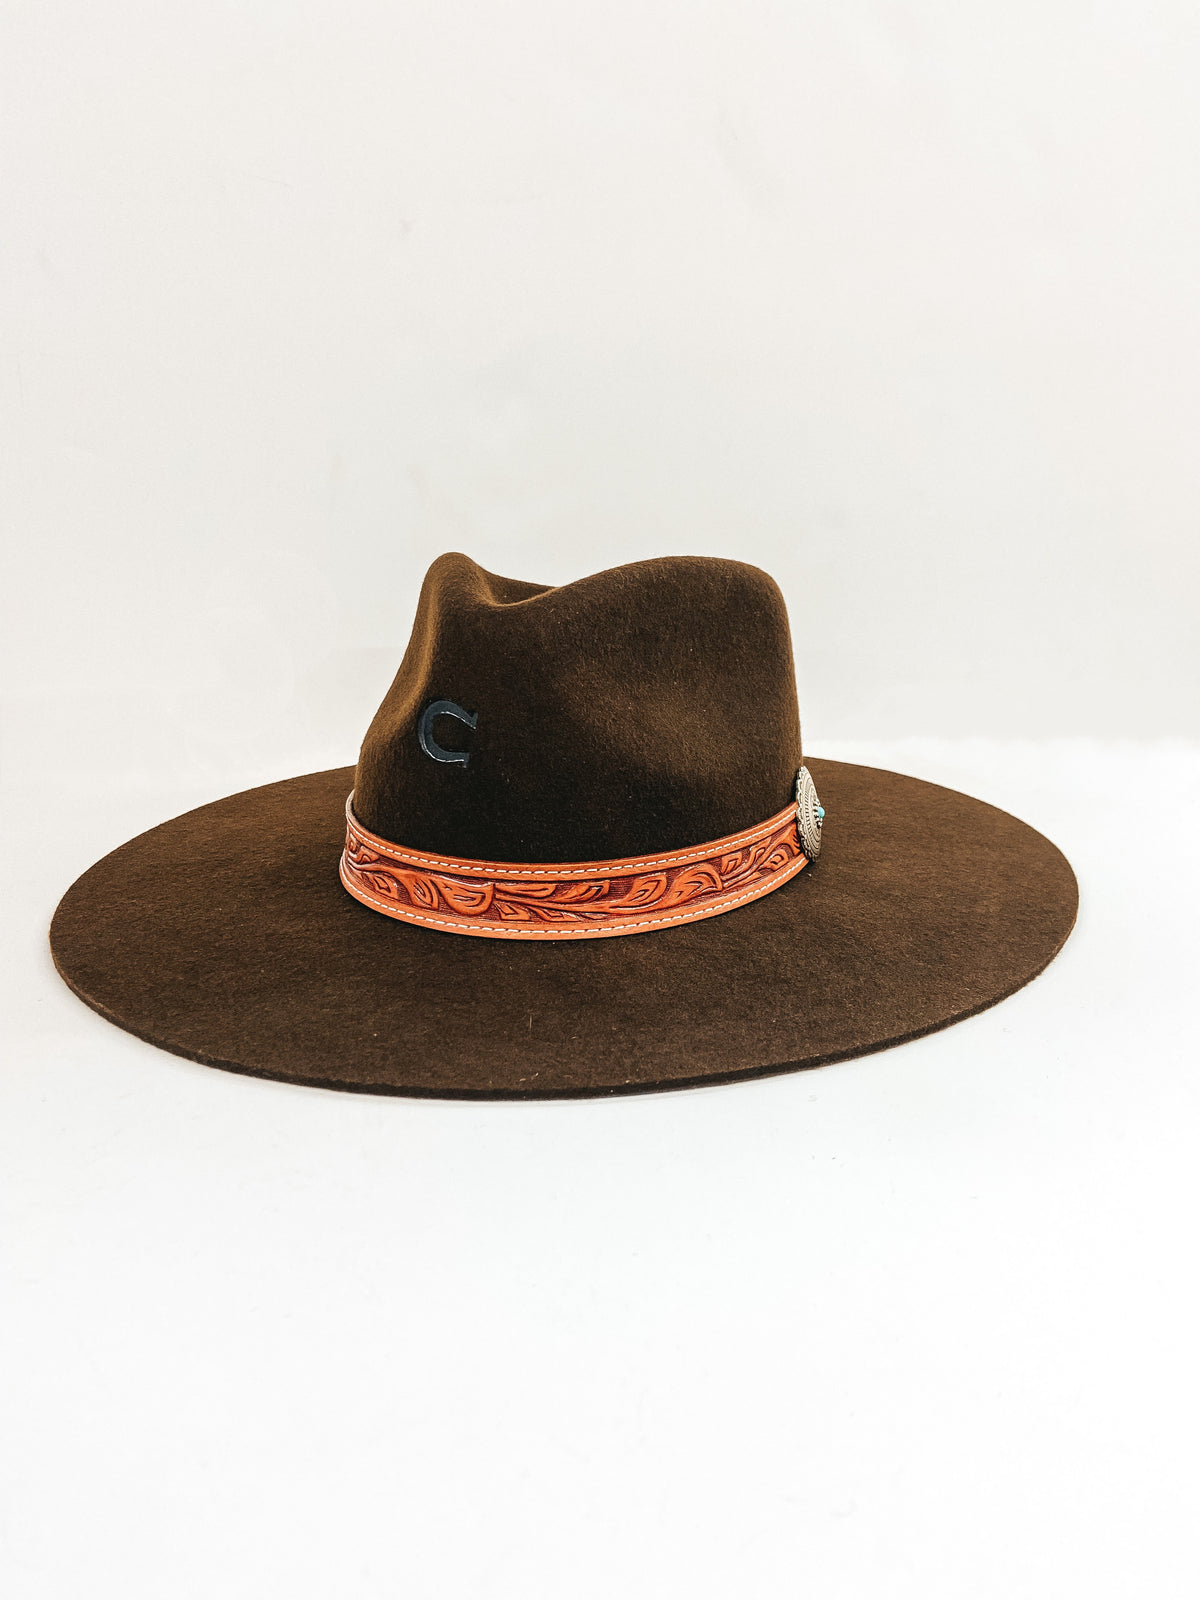 Charlie 1 Horse “White Sands Chocolate” Wool Hat